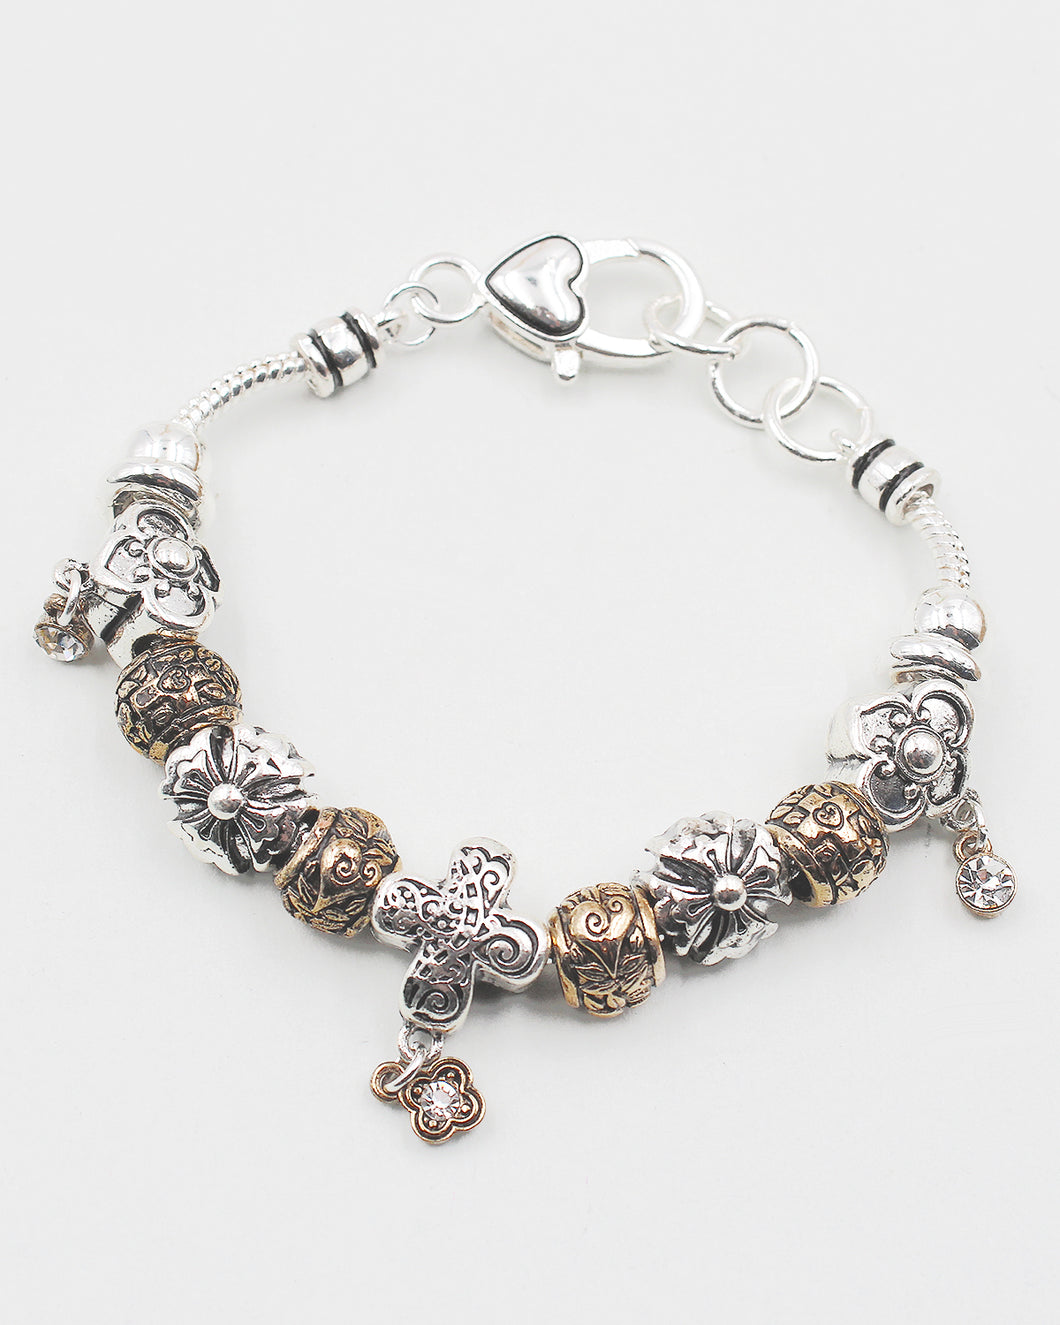 Multiple Metal Bead Bracelet with Tiny Charms